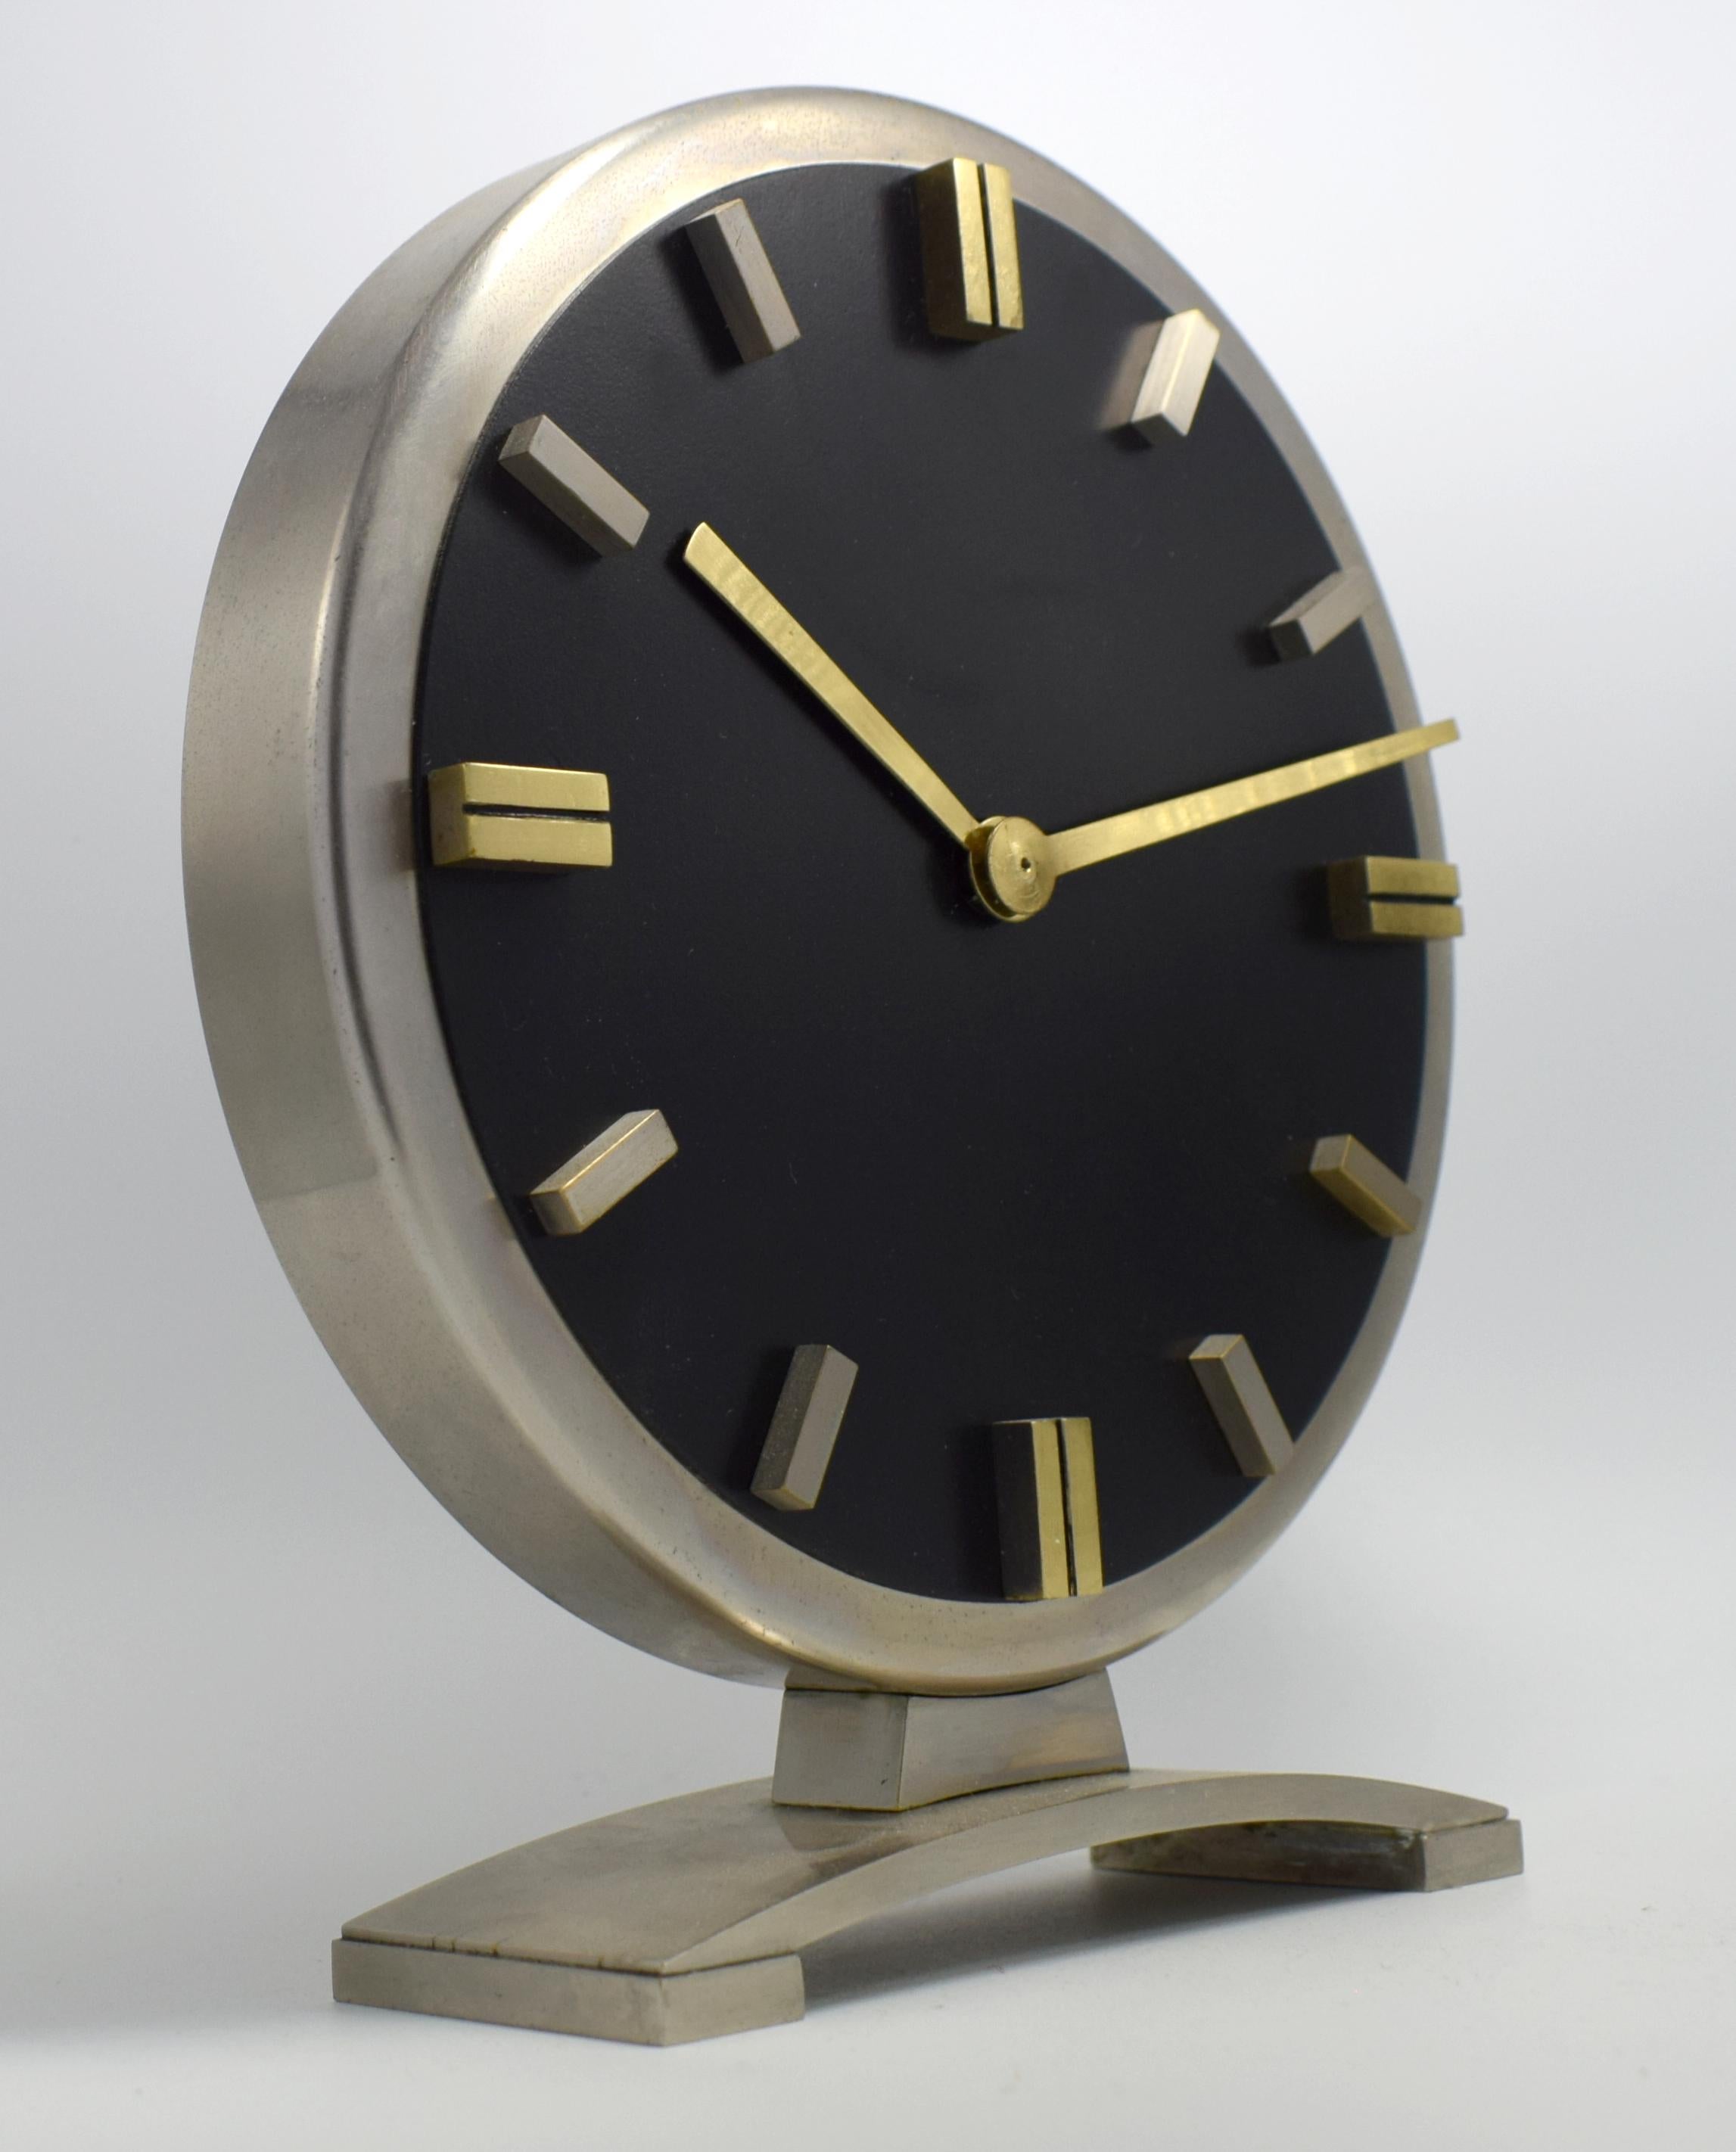 Weighing in at nearly 1.5 kilos this is not only an impressive looking clock but deceptively heavy when you handle it. Although there's no makers name there is an undeniable quality to this clock and would hazard a guess it's probably German in